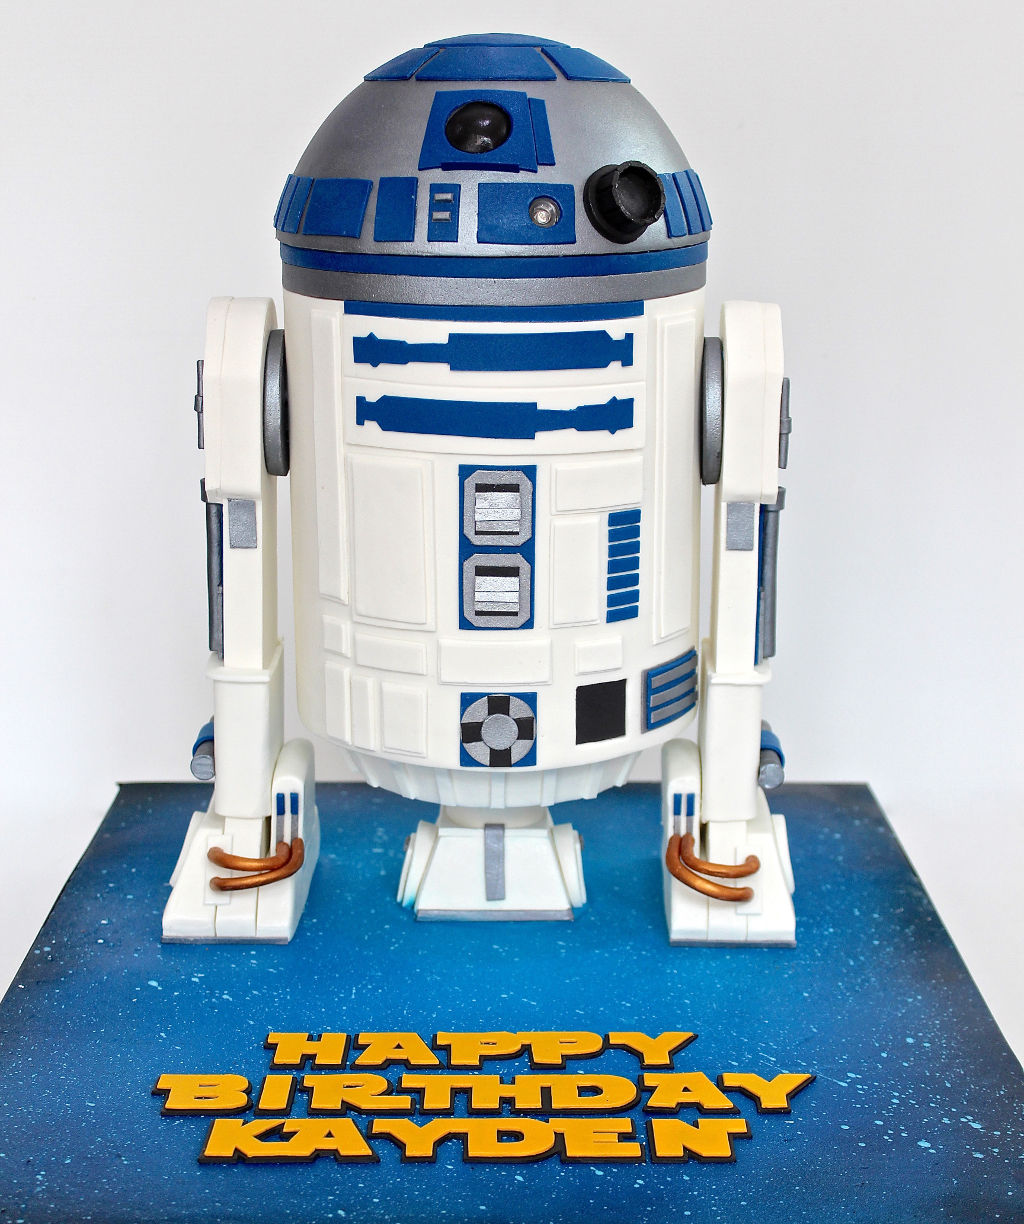 Kid's birthday Cake - R2D2 cake from Celebrate with Cake!